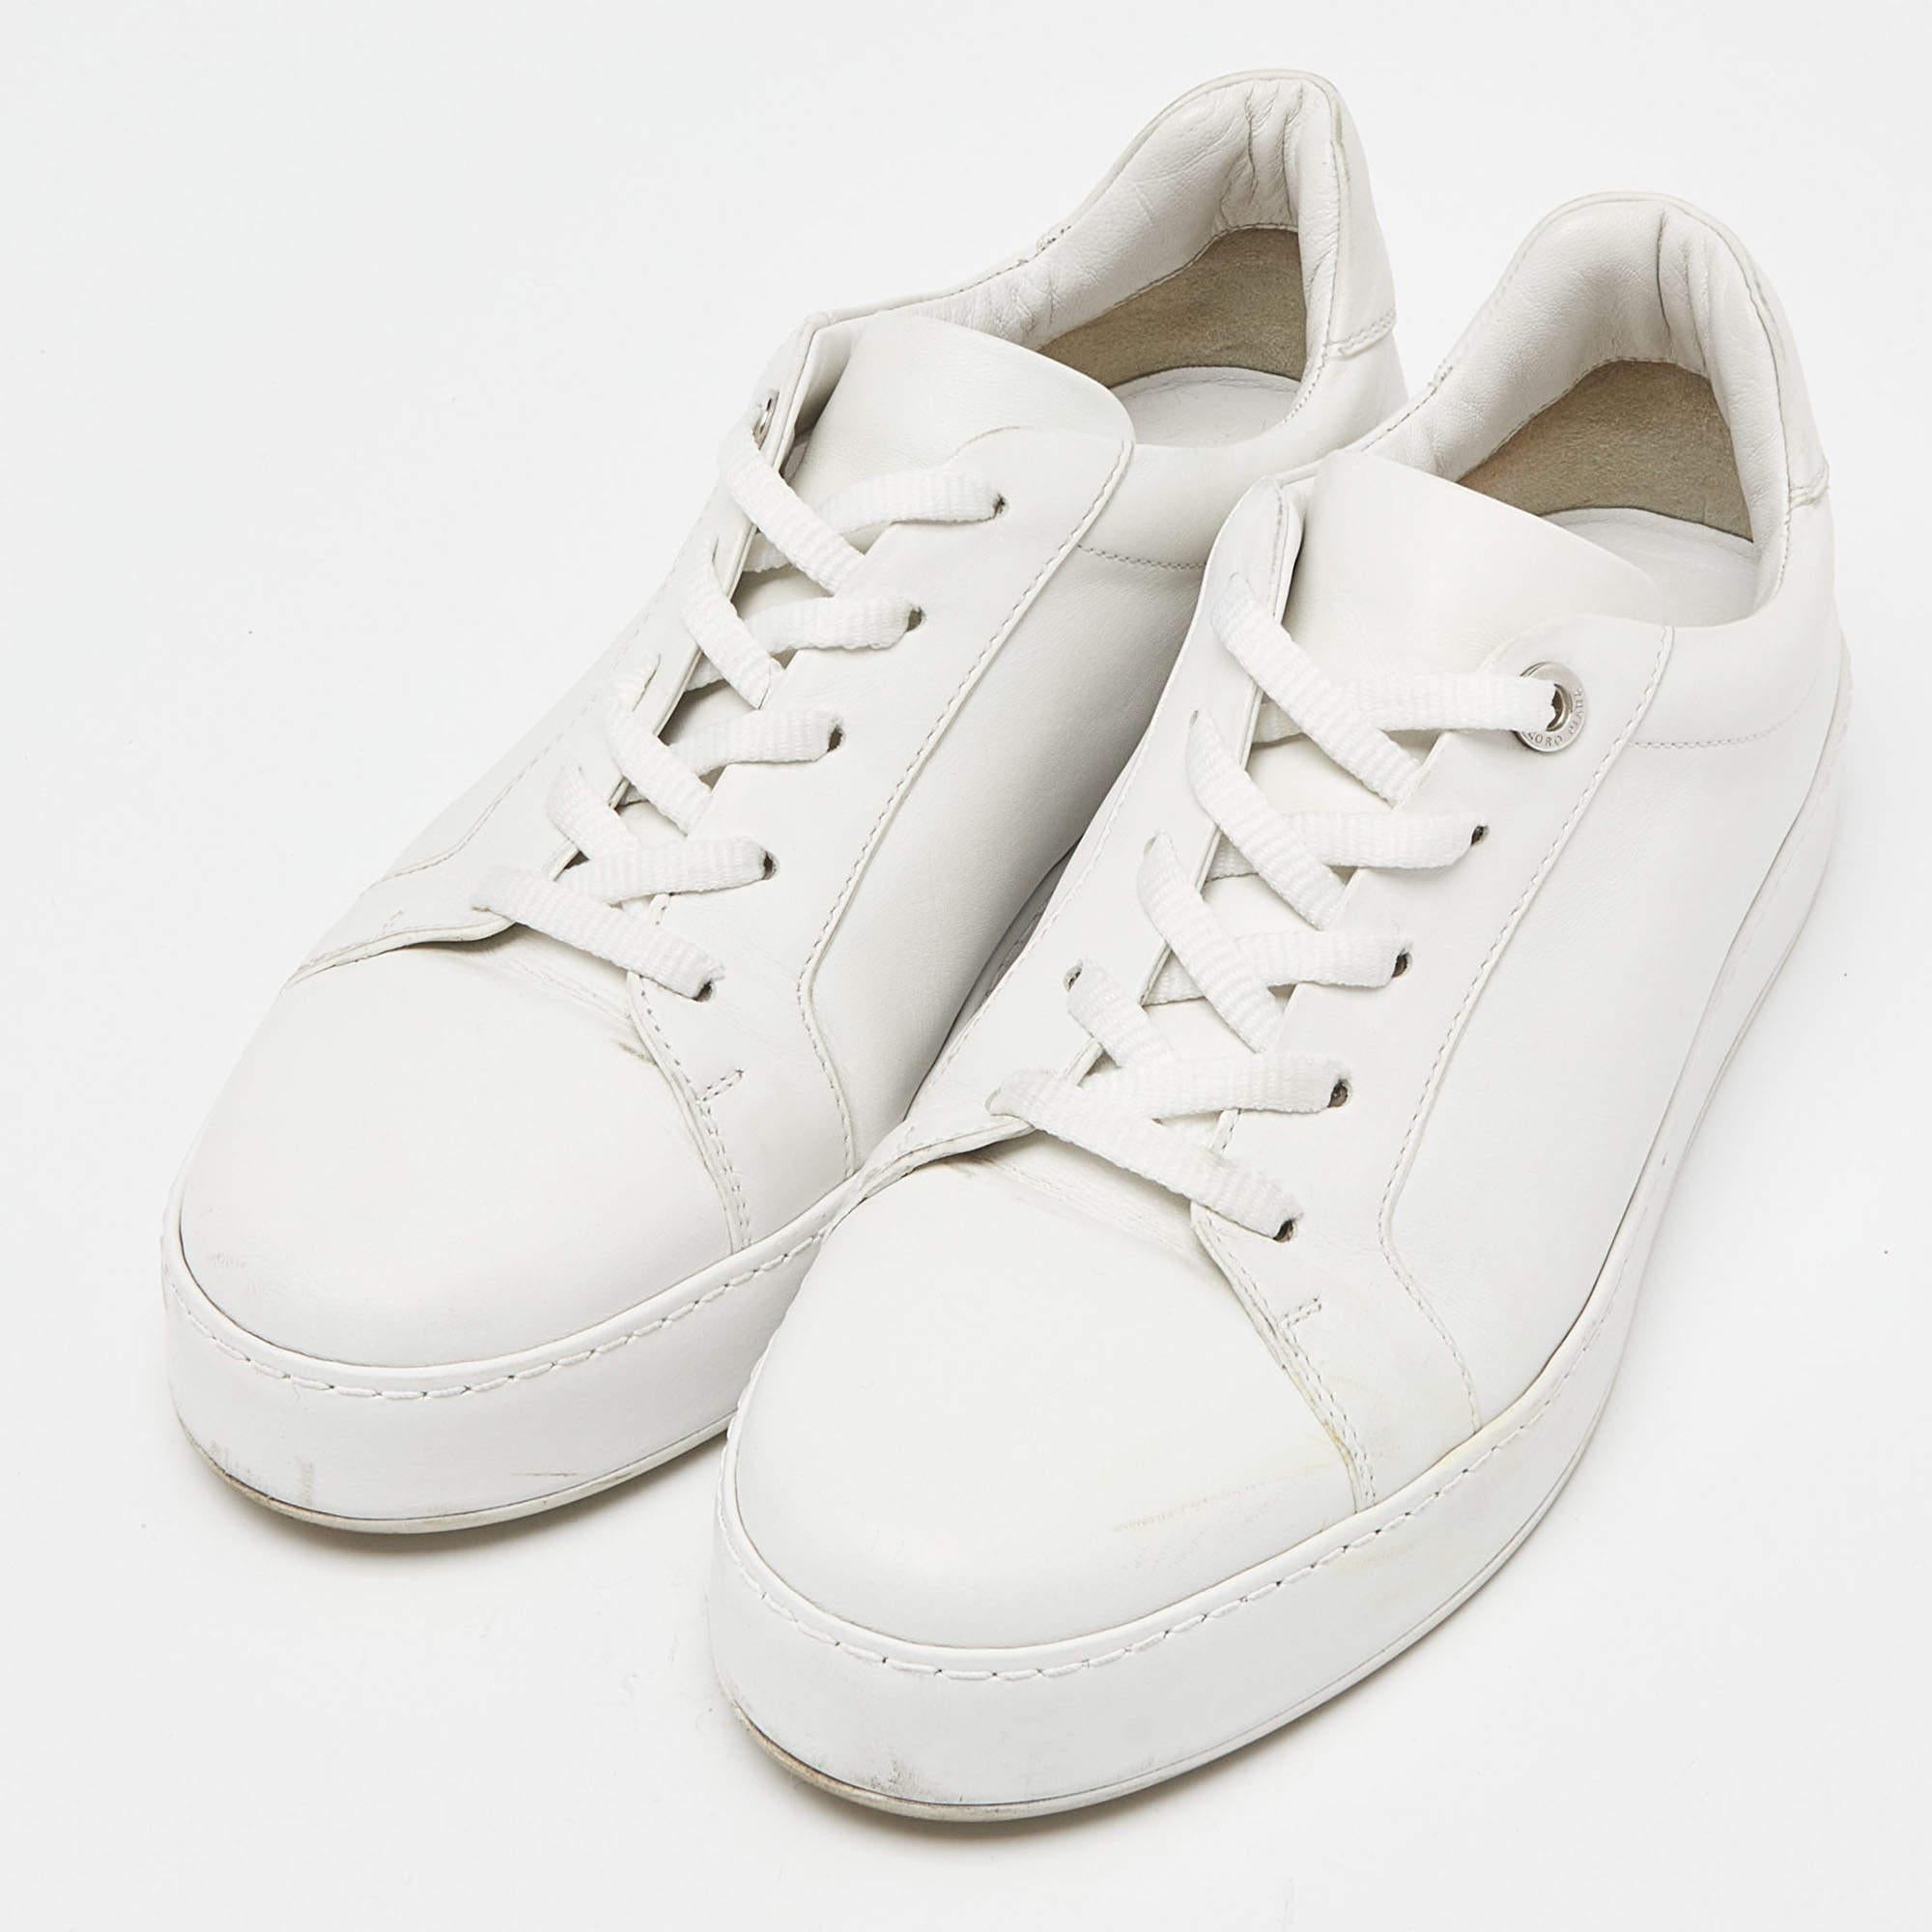 Add a statement appeal to your outfit with these Loro Piana white sneakers. Made from premium materials, they feature lace-up vamps and relaxing footbeds. The rubber sole of this pair aims to provide you with everyday ease.

